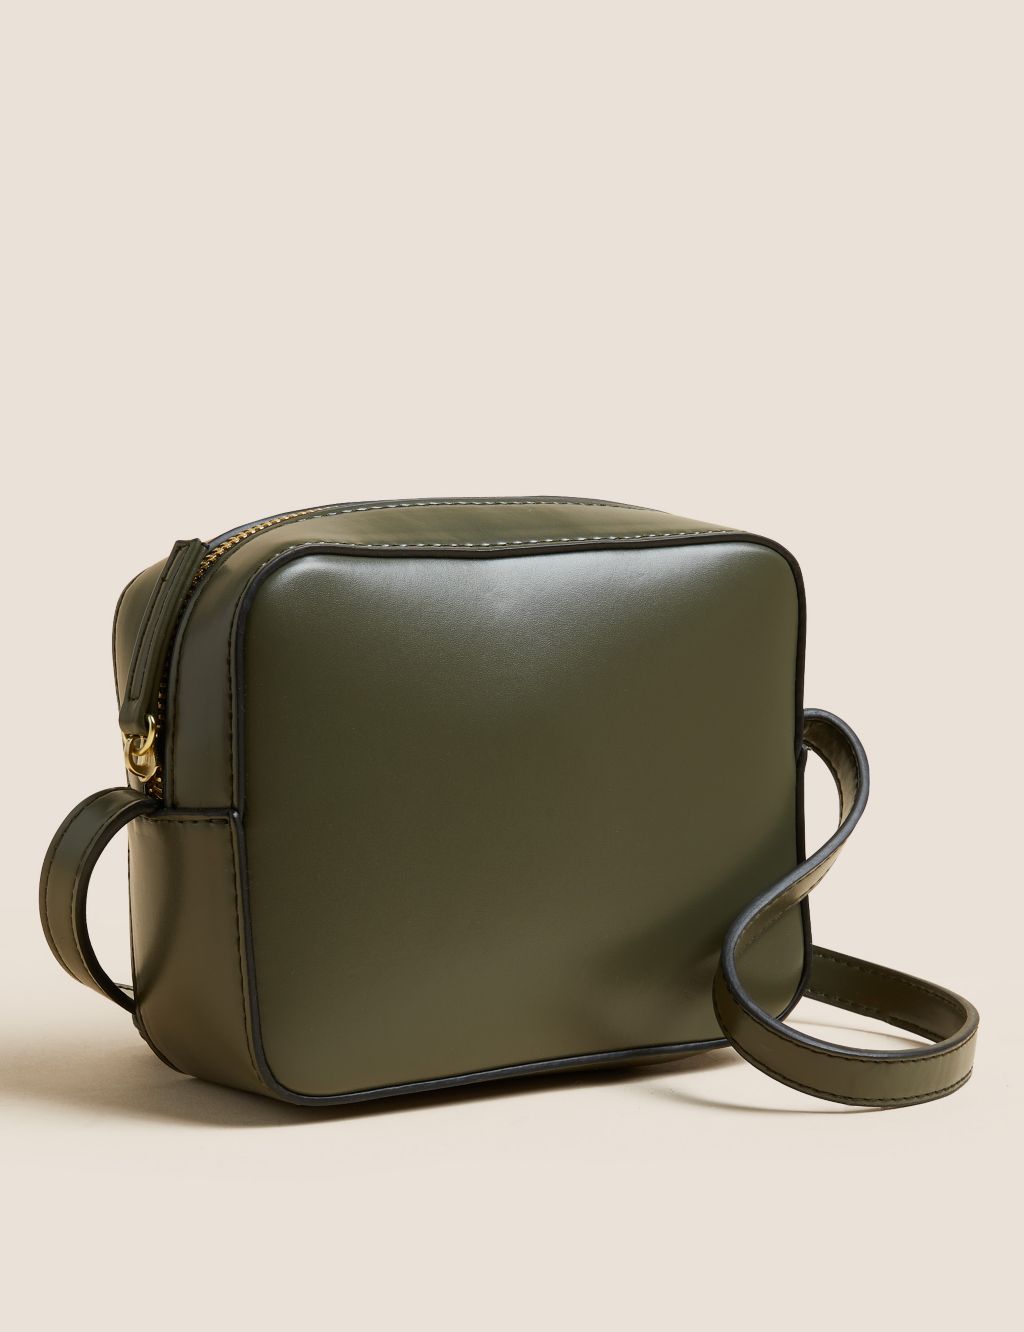 Faux Leather Cross Body Bag image 1